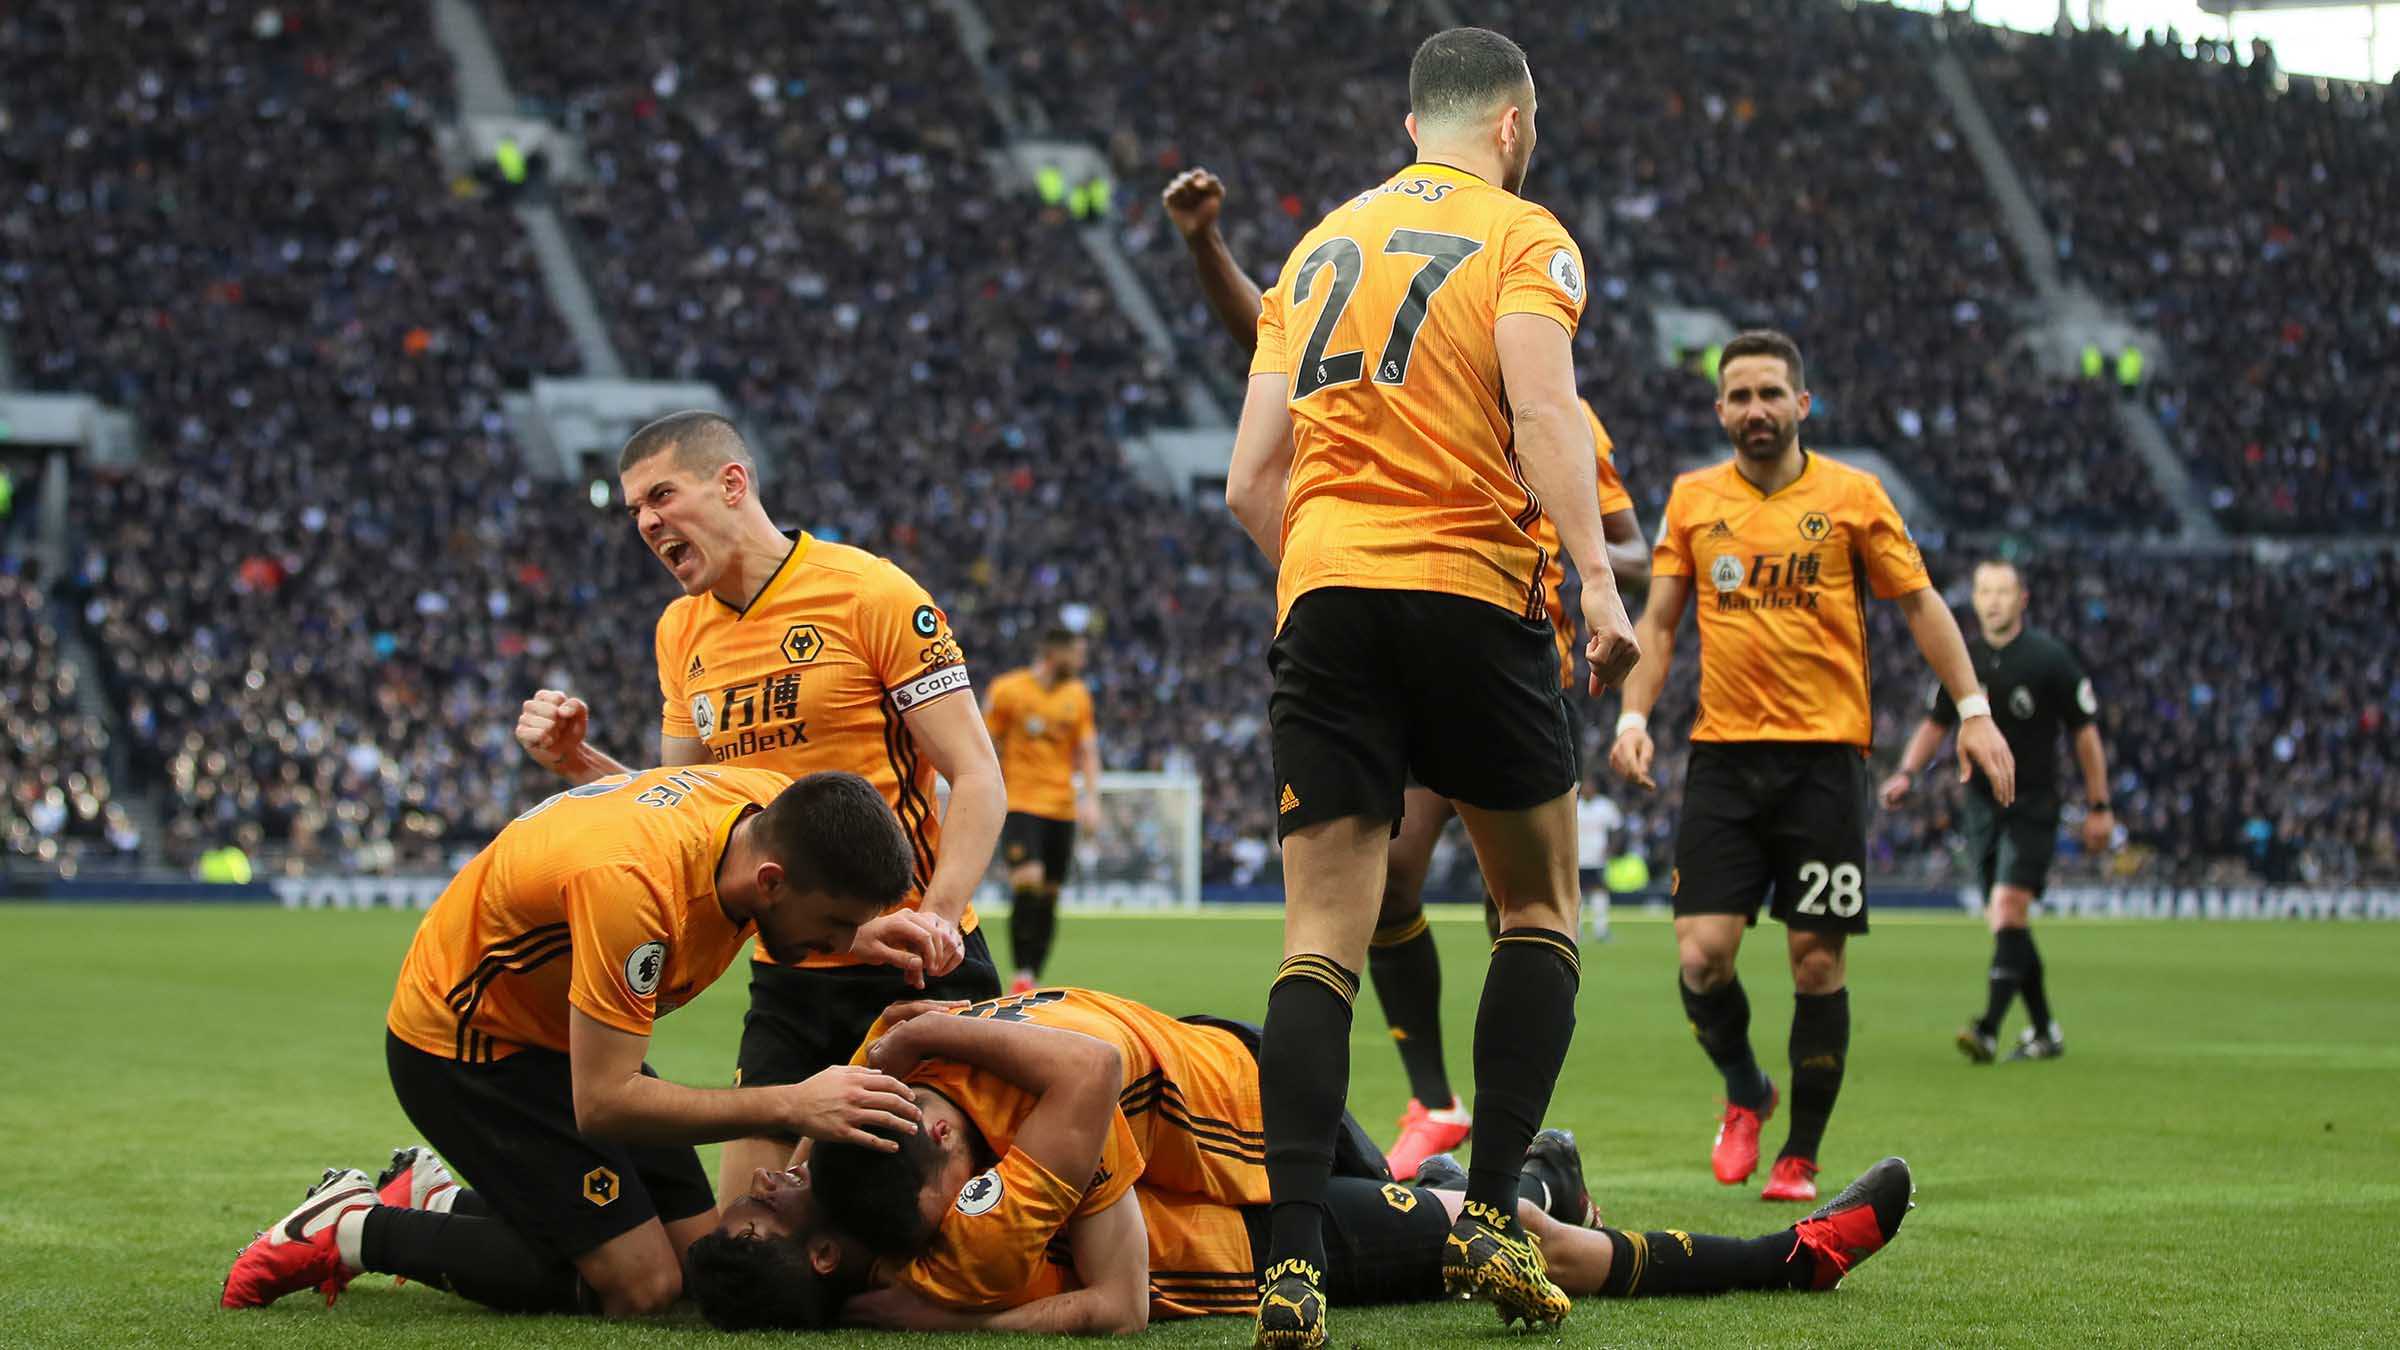 Wolves come from behind to gain historic win over Spurs